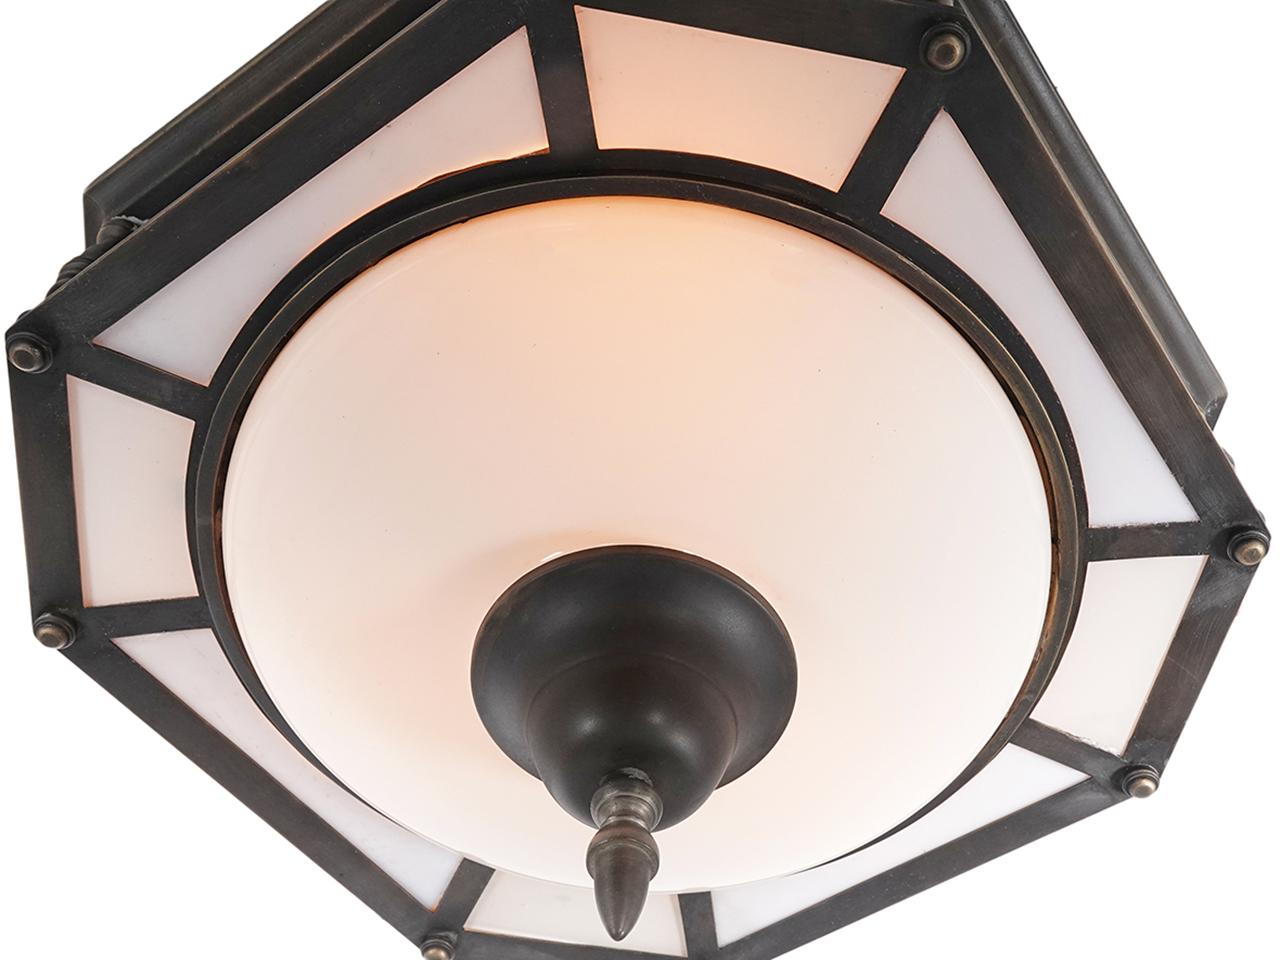 This is a very simple and elegant domed and paneled milk flush mounted lamp. You would most likely find this type of large ceiling fixture in a bank or municipal building. It has a center dome and 16 framed panels.